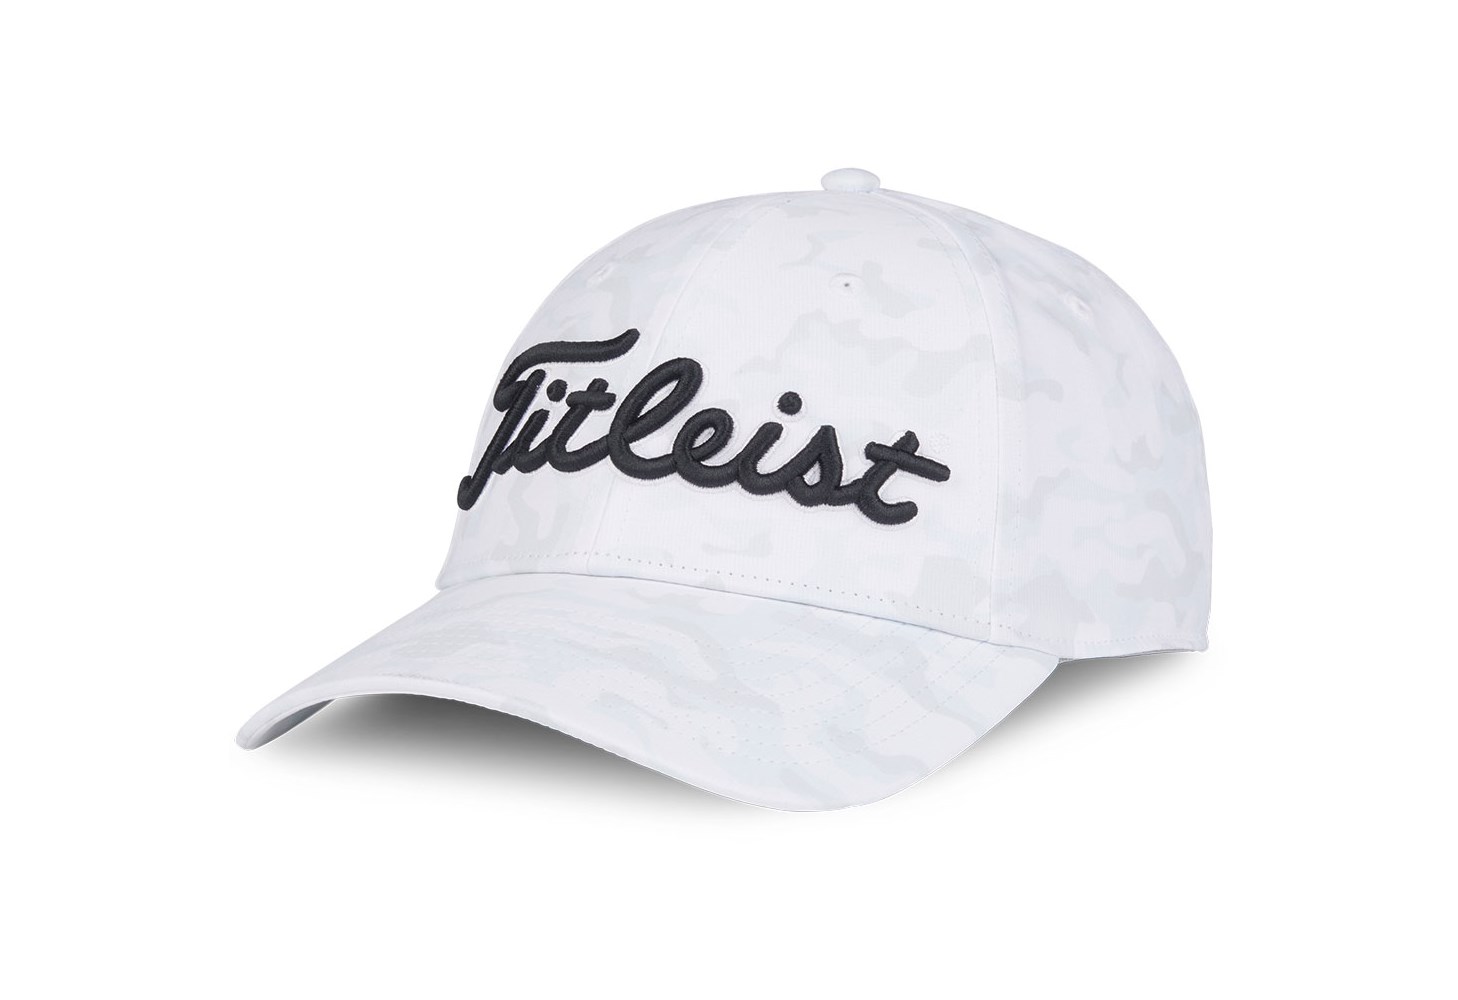 Titleist Mens Players Performance Cap - White Out Collection